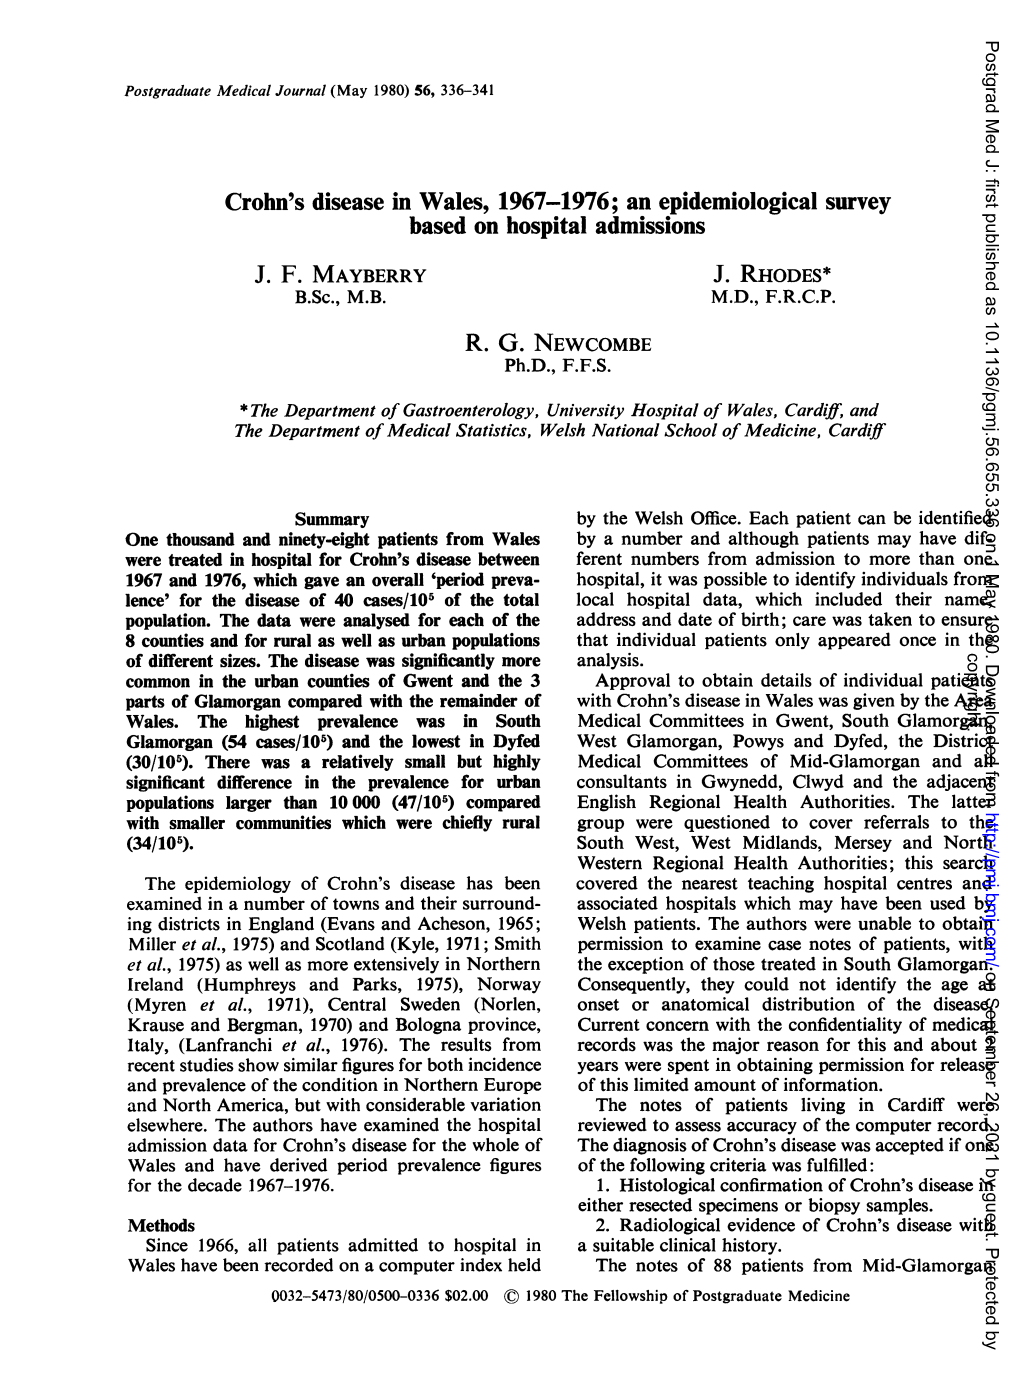 Crohn's Disease in Wales, 1967-1976; an Epidemiological Survey Based on Hospital Admissions J